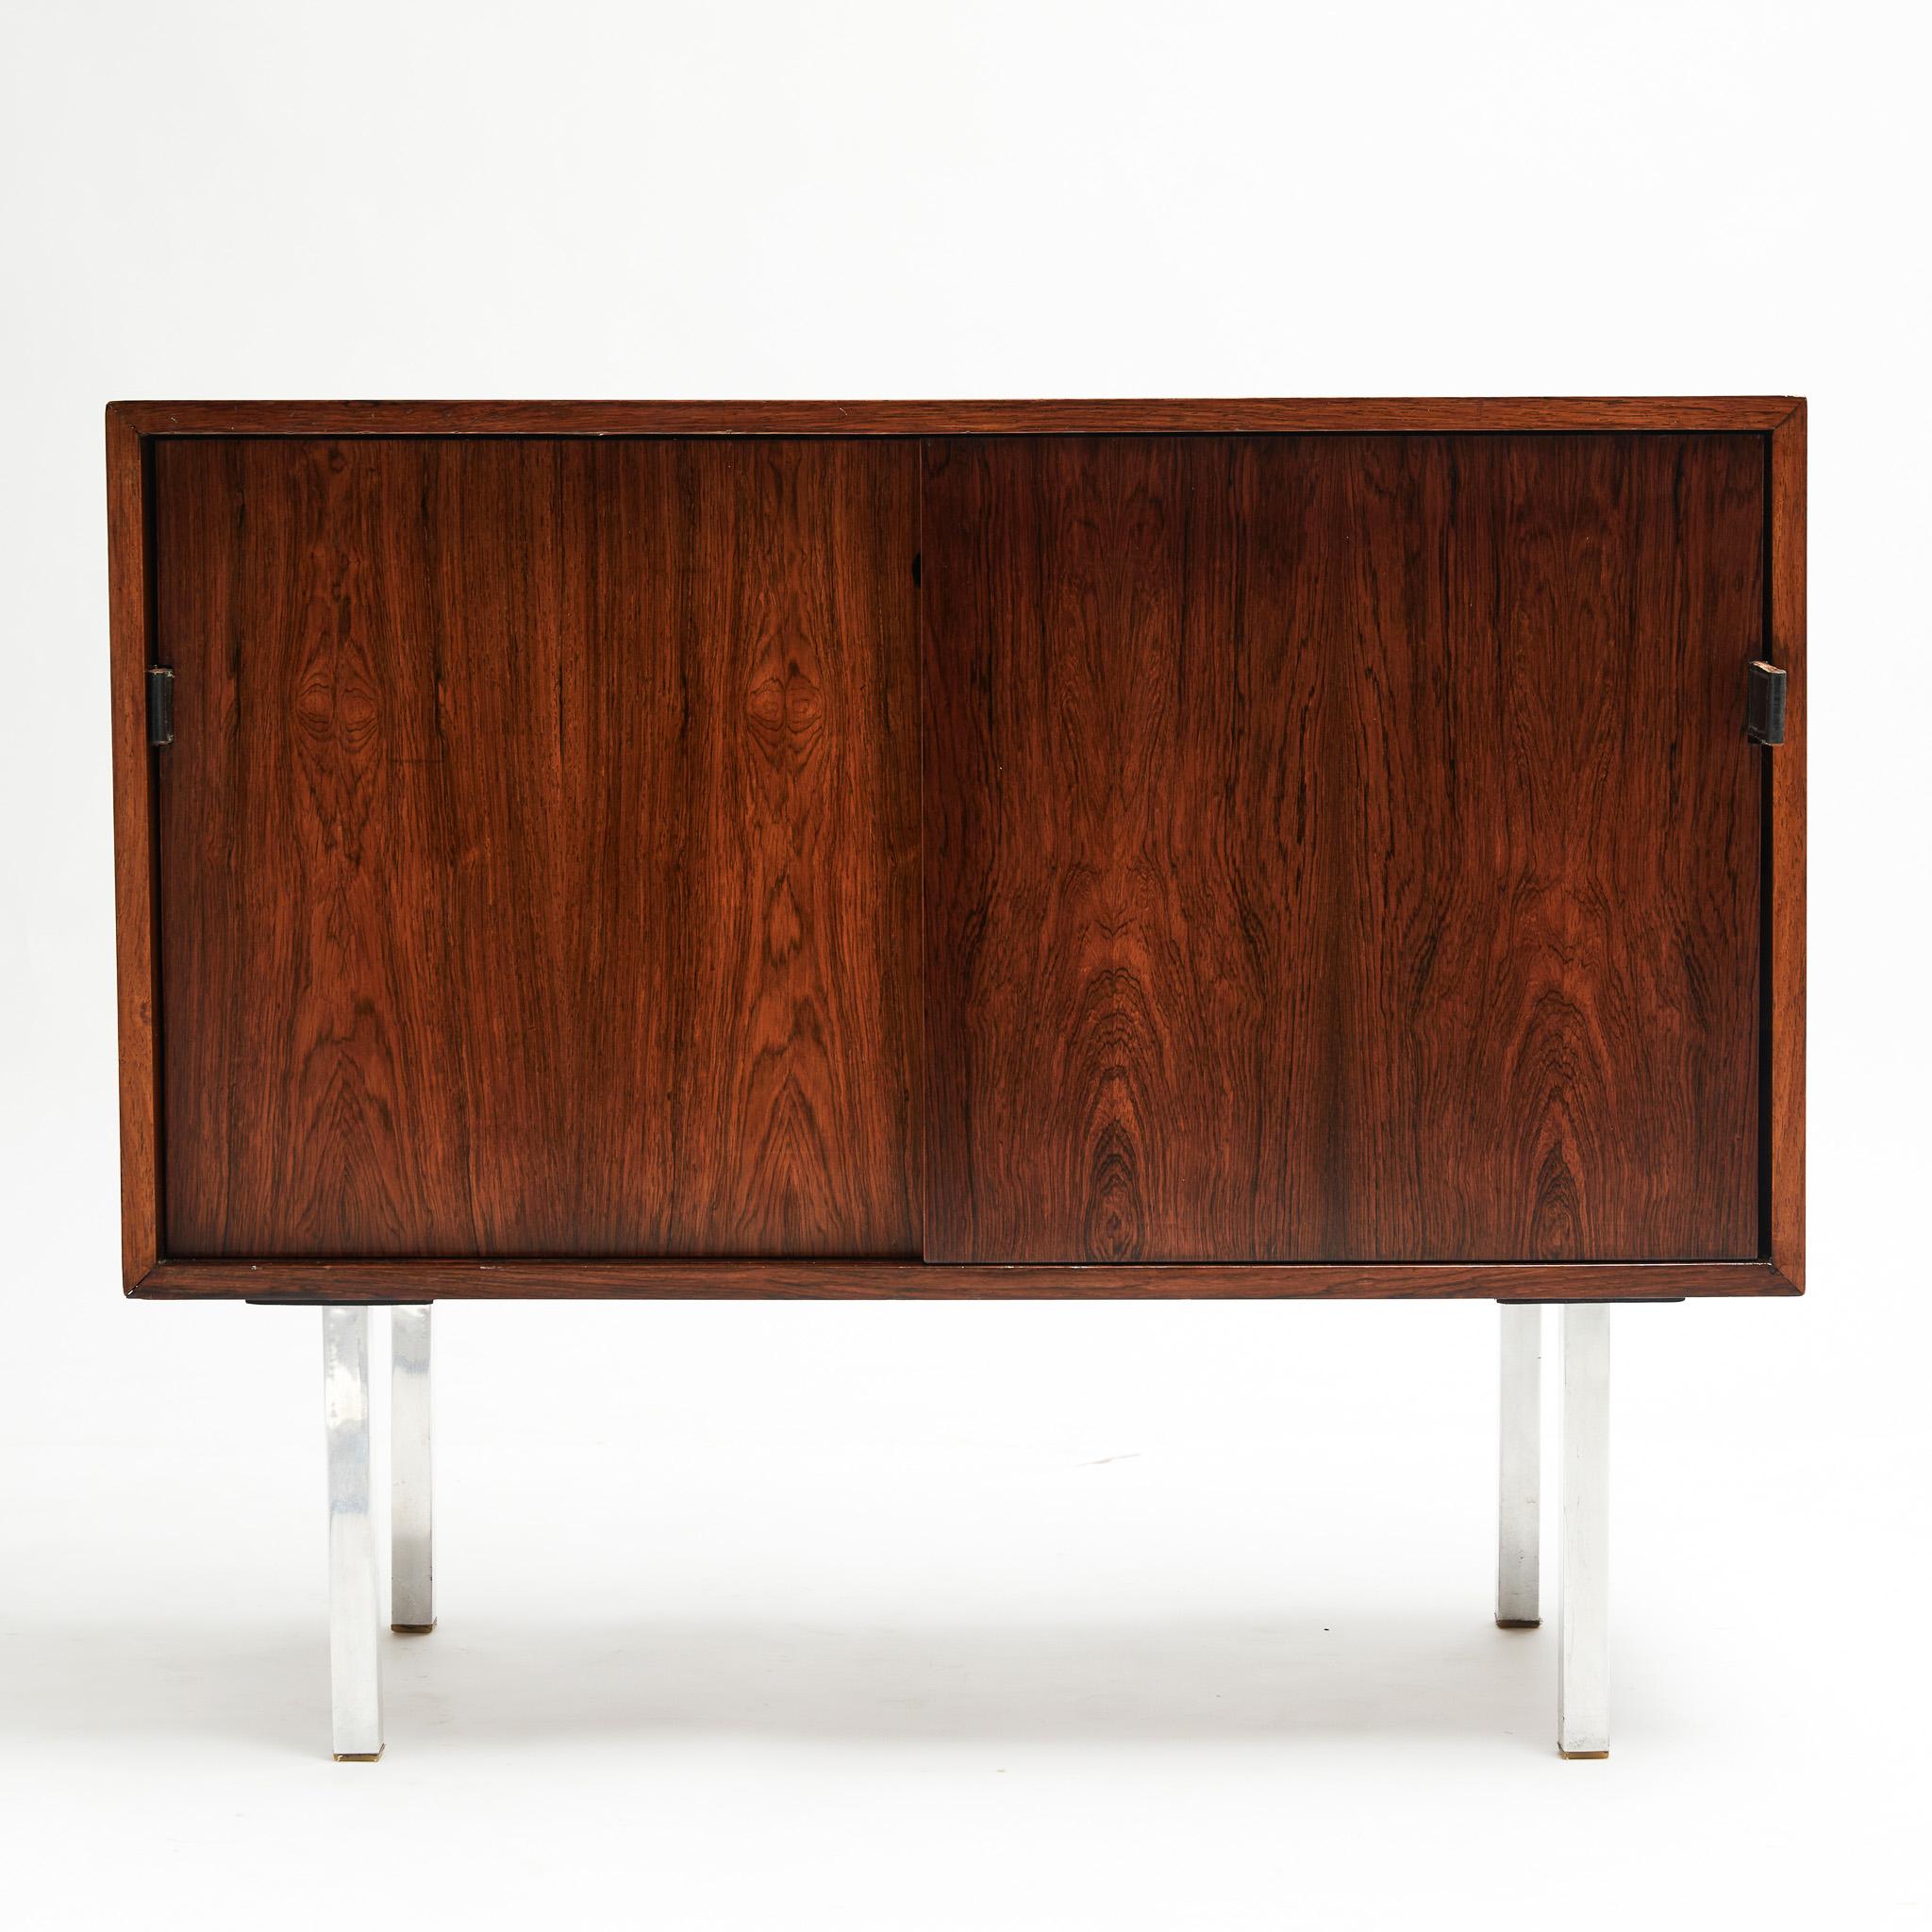 Brazilian Midcentury Chest in Hardwood & Chrome by Forma Moveis, 1965 Brazil, Sealed For Sale